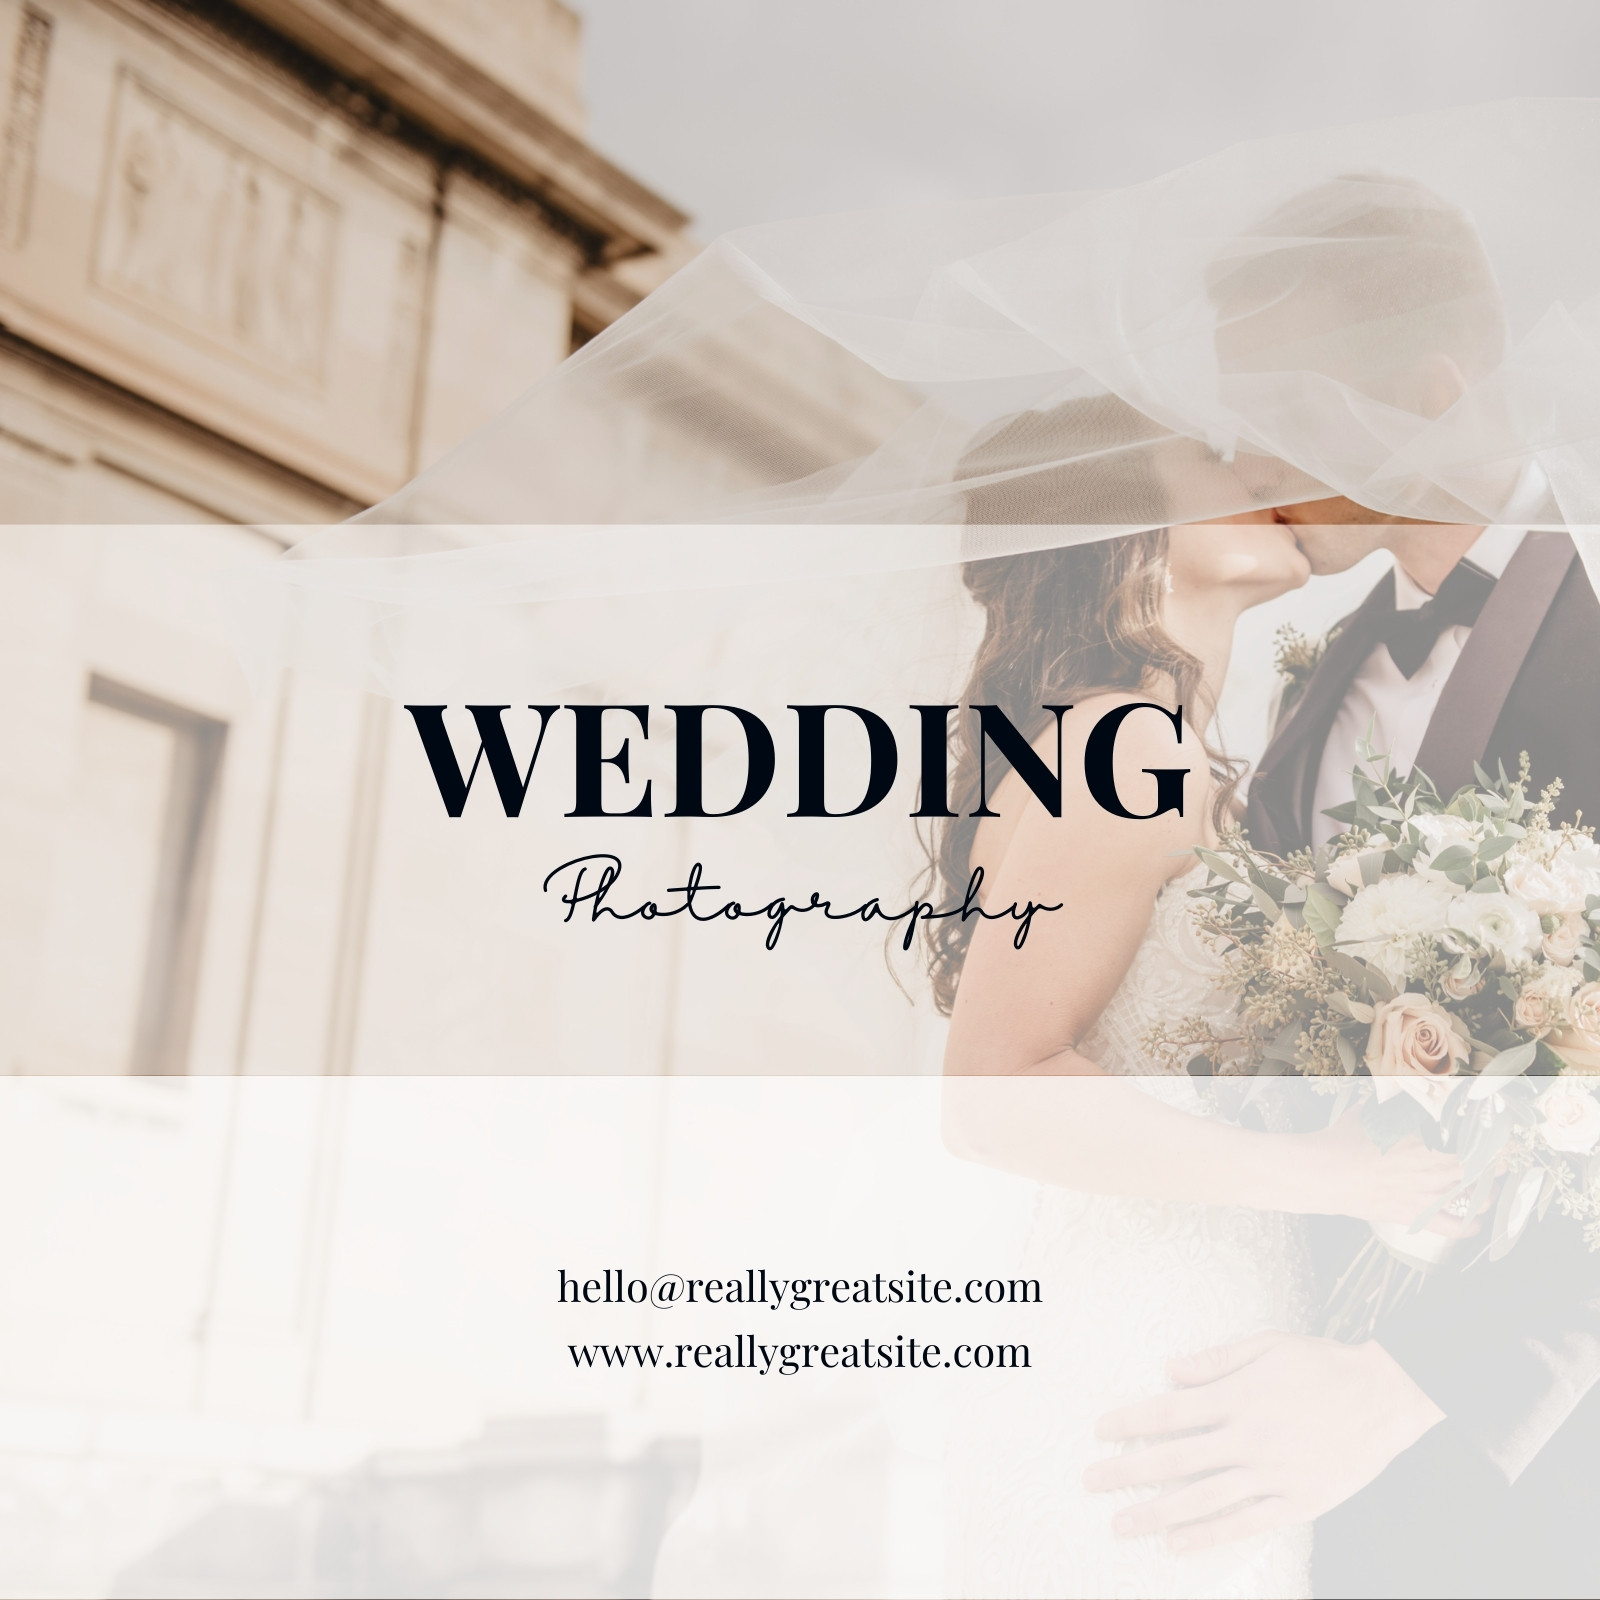 The Wedding Photographer And Bride In A Photo Framed With Gold On Table  Background, 30x40cm Picture Frame Background Image And Wallpaper for Free  Download